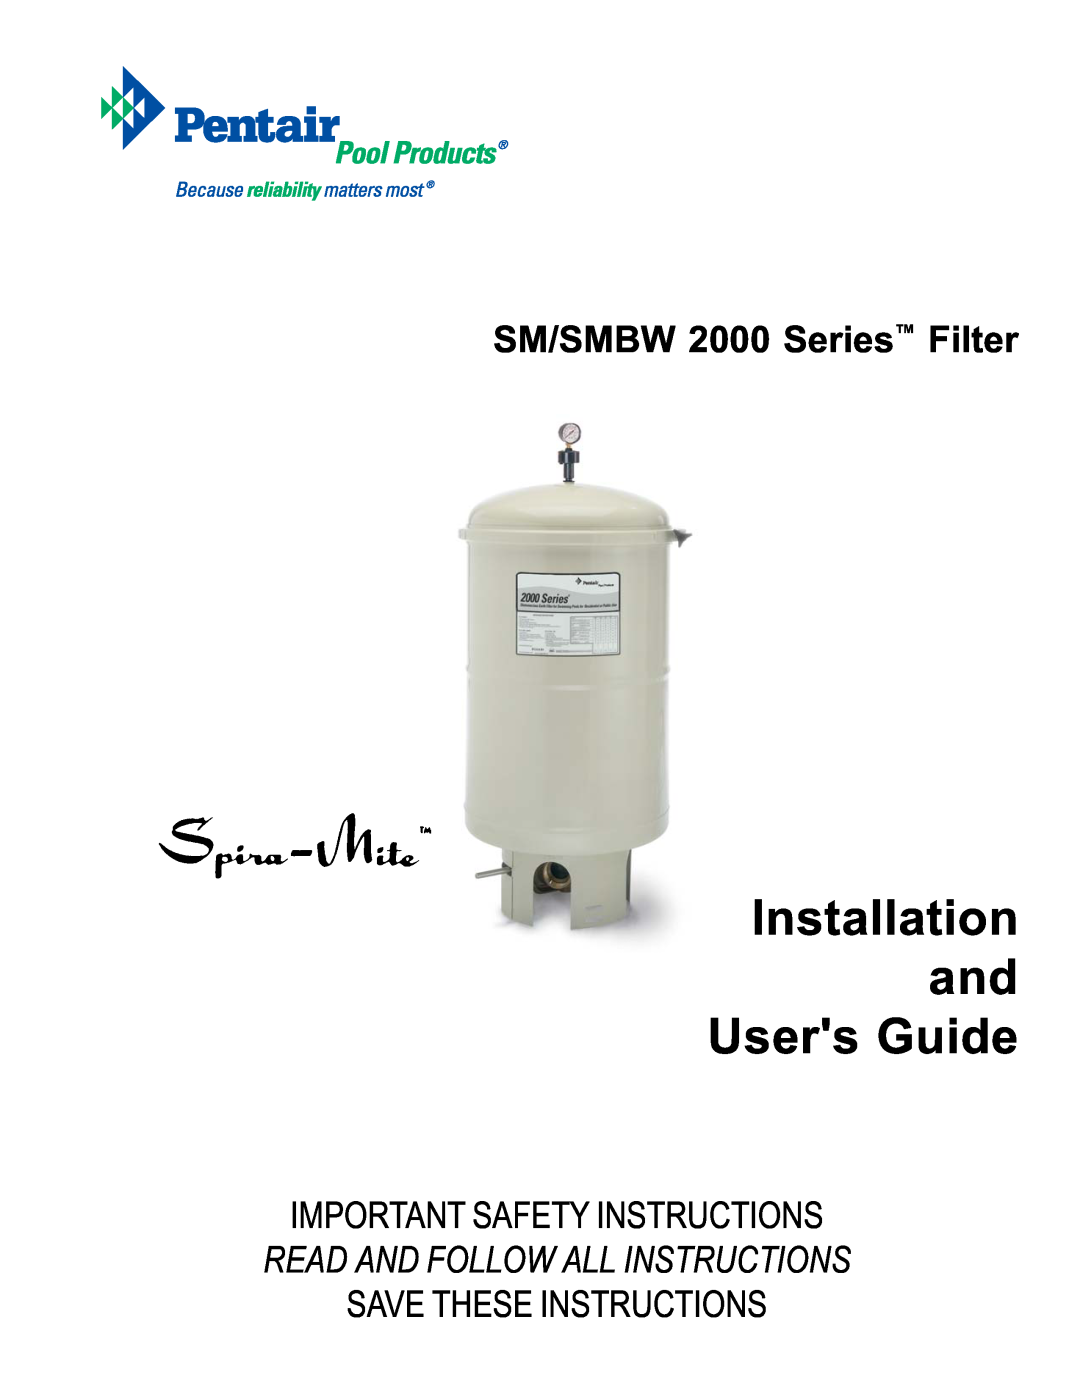 Pentair important safety instructions Installation and Users Guide, SM/SMBW 2000 Series Filter, Save These Instructions 